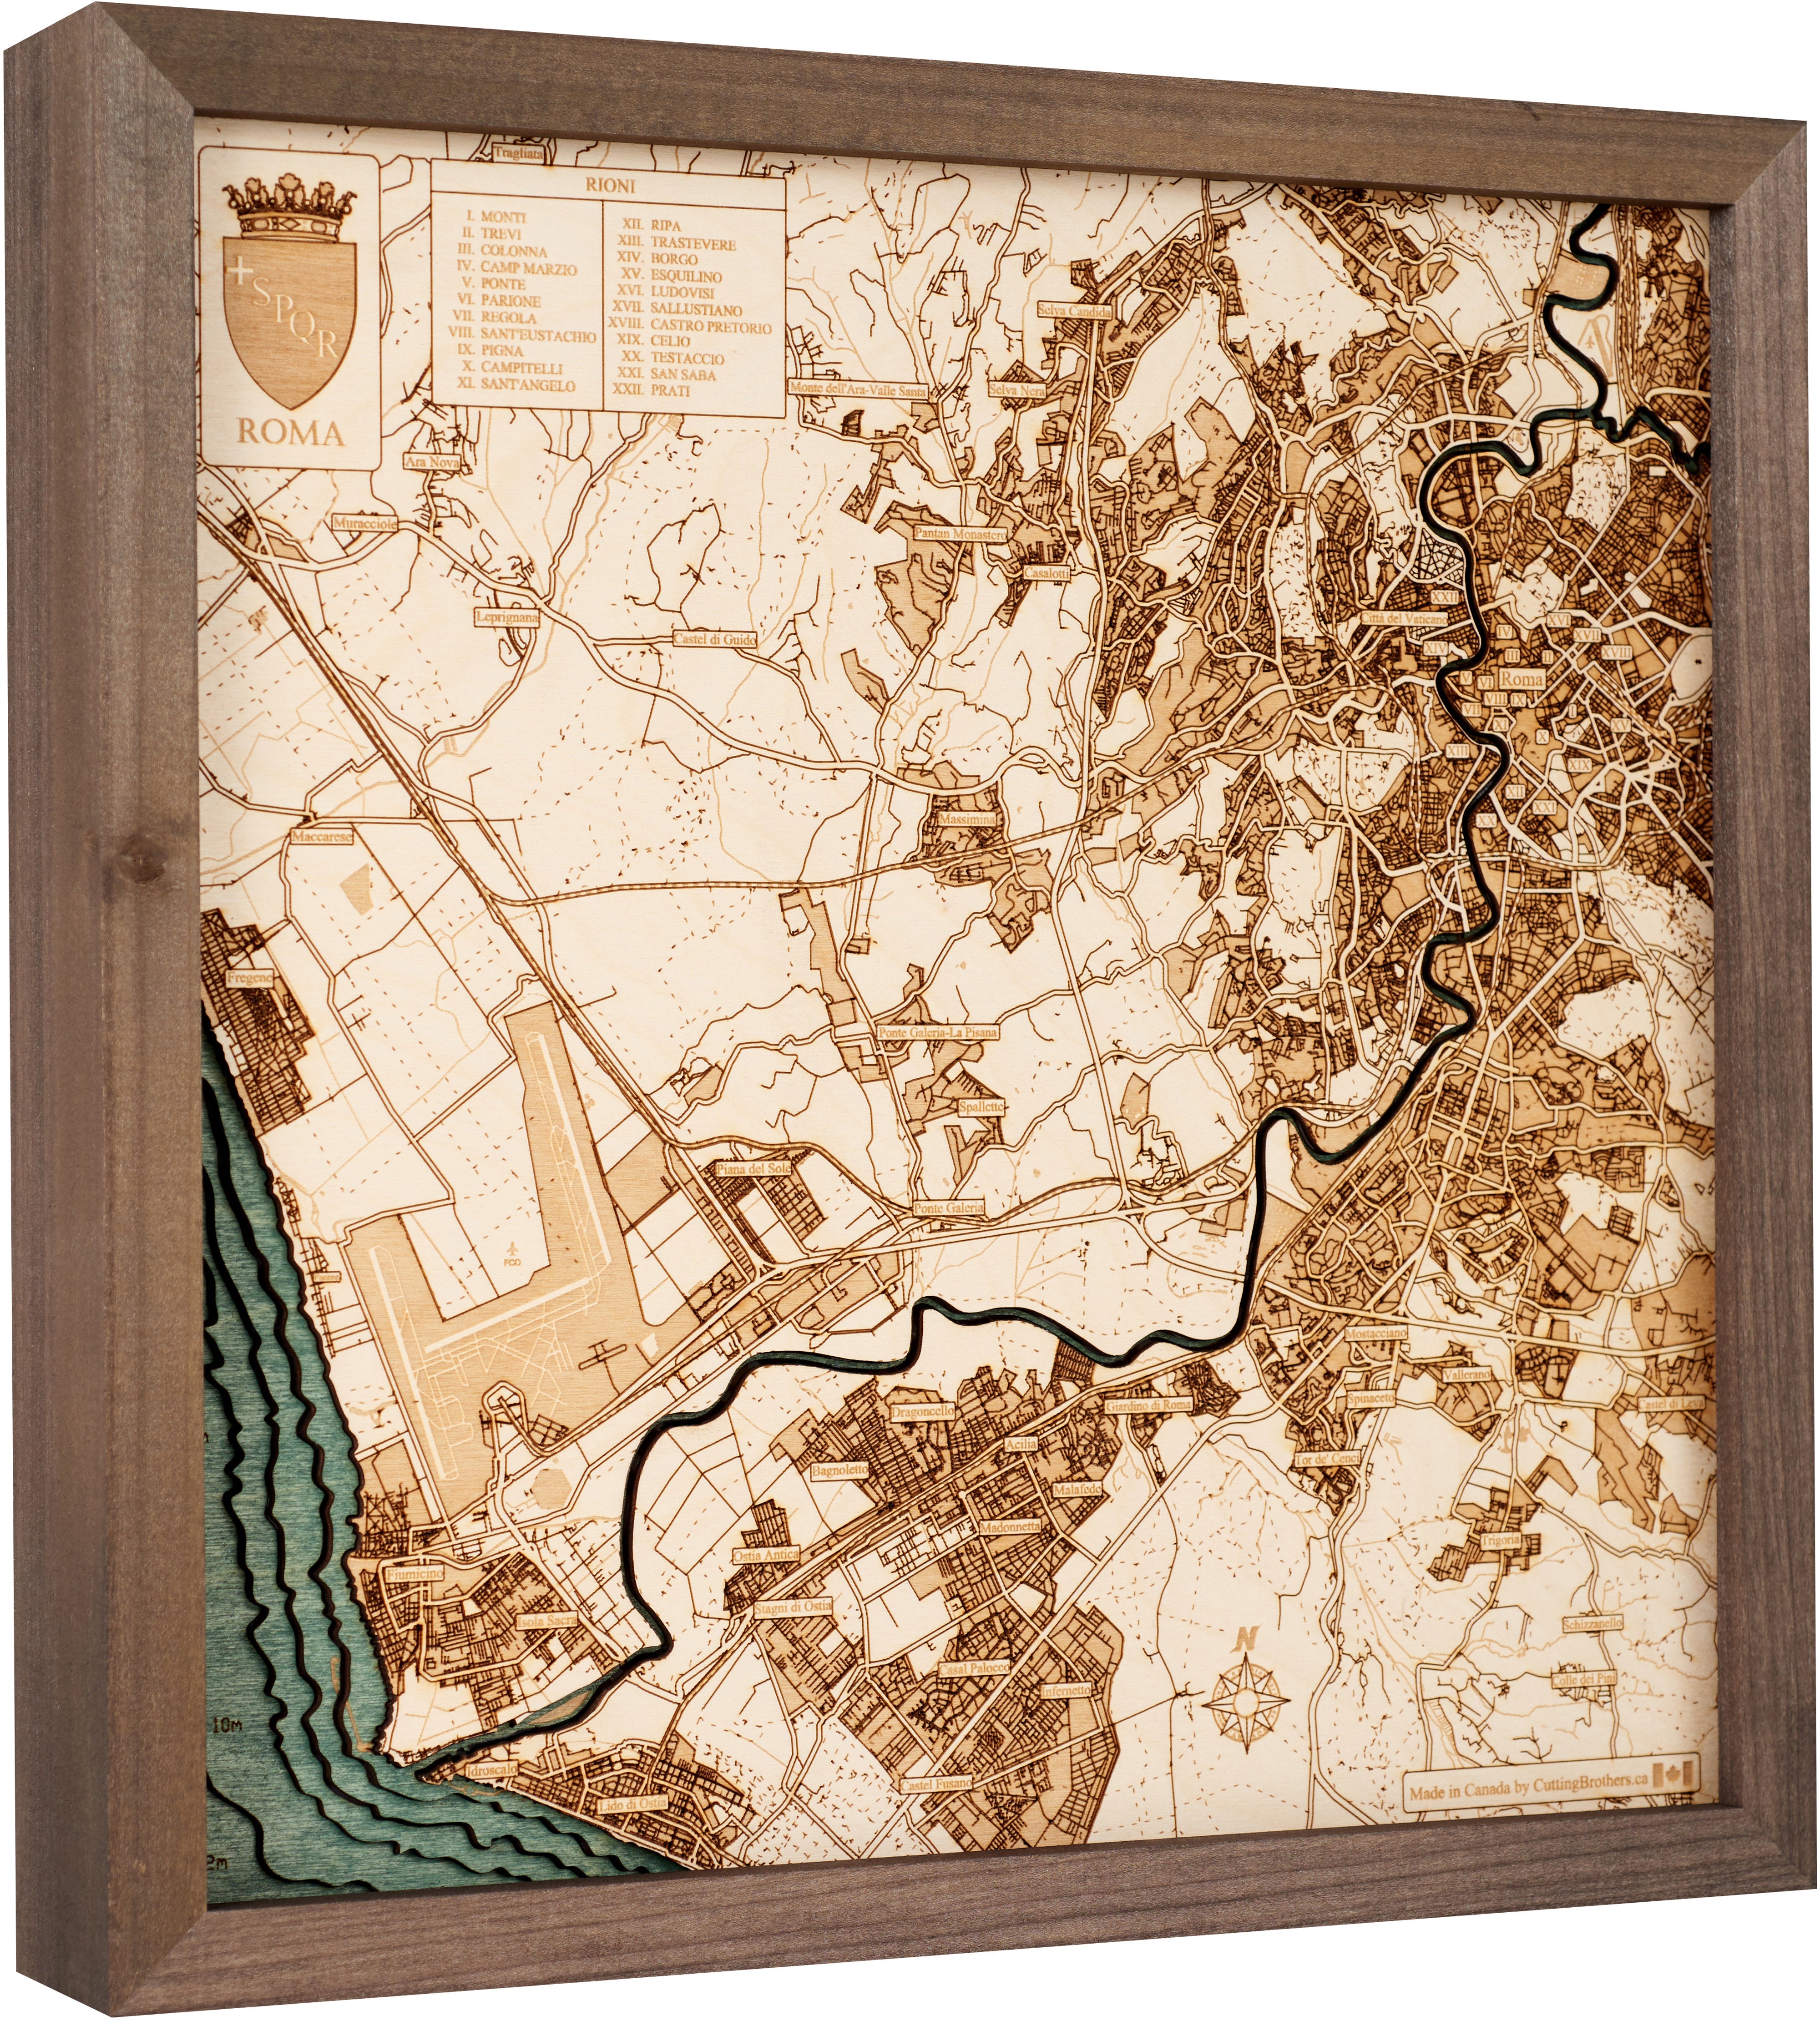 ROME 3D Wooden Wall Map - Version S 